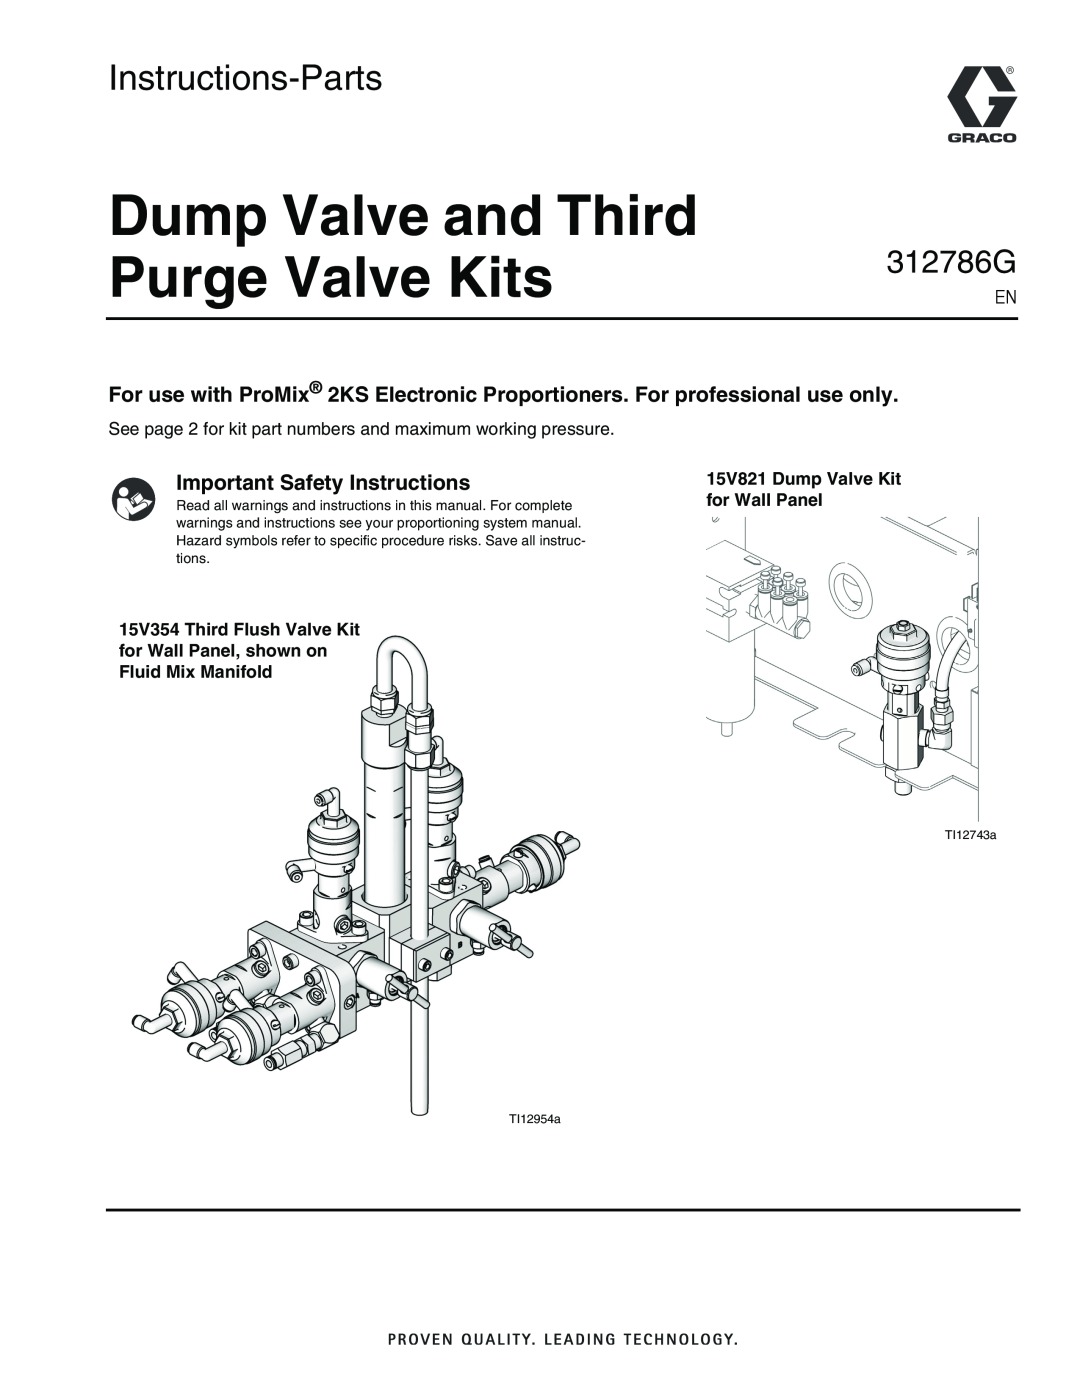 Graco TI12743a important safety instructions Important Safety Instructions, 15V821 Dump Valve Kit for Wall Panel, 312786G 